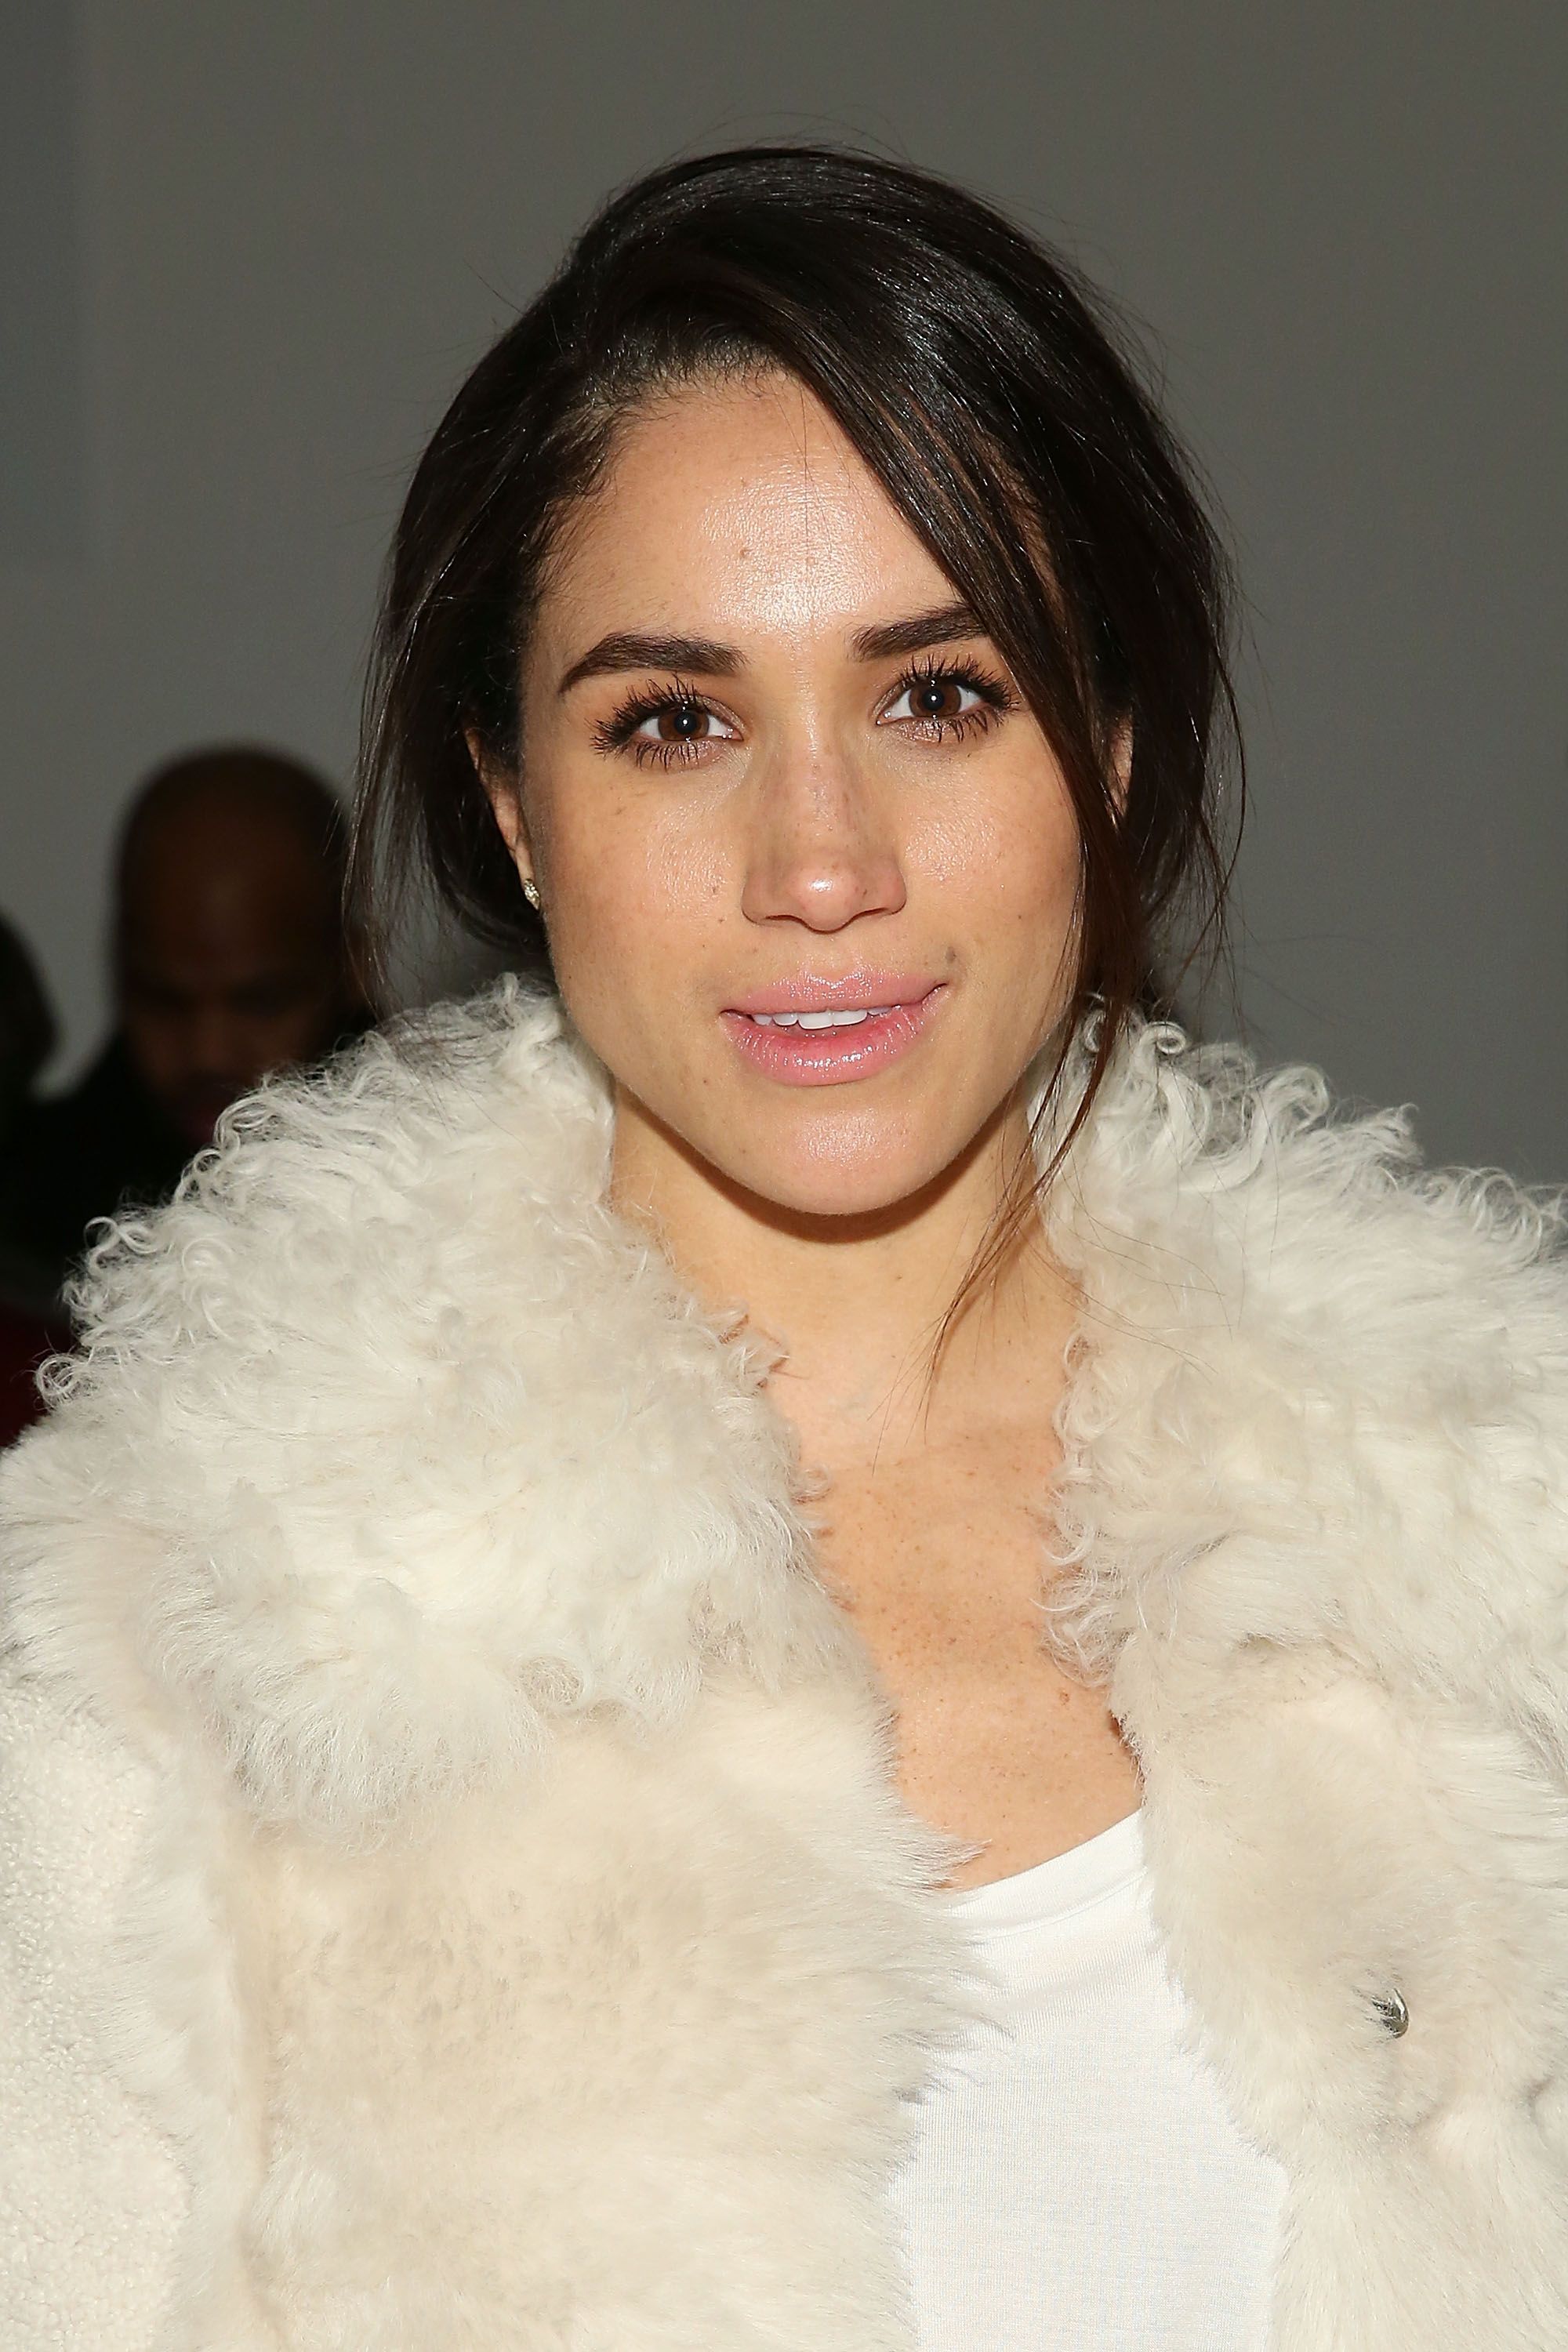 Meghan Markle during the Wes Gordon runway show during MADE Fashion Week Fall 2015 at Milk Studios on February 13, 2015 in New York City. | Source: Getty Images